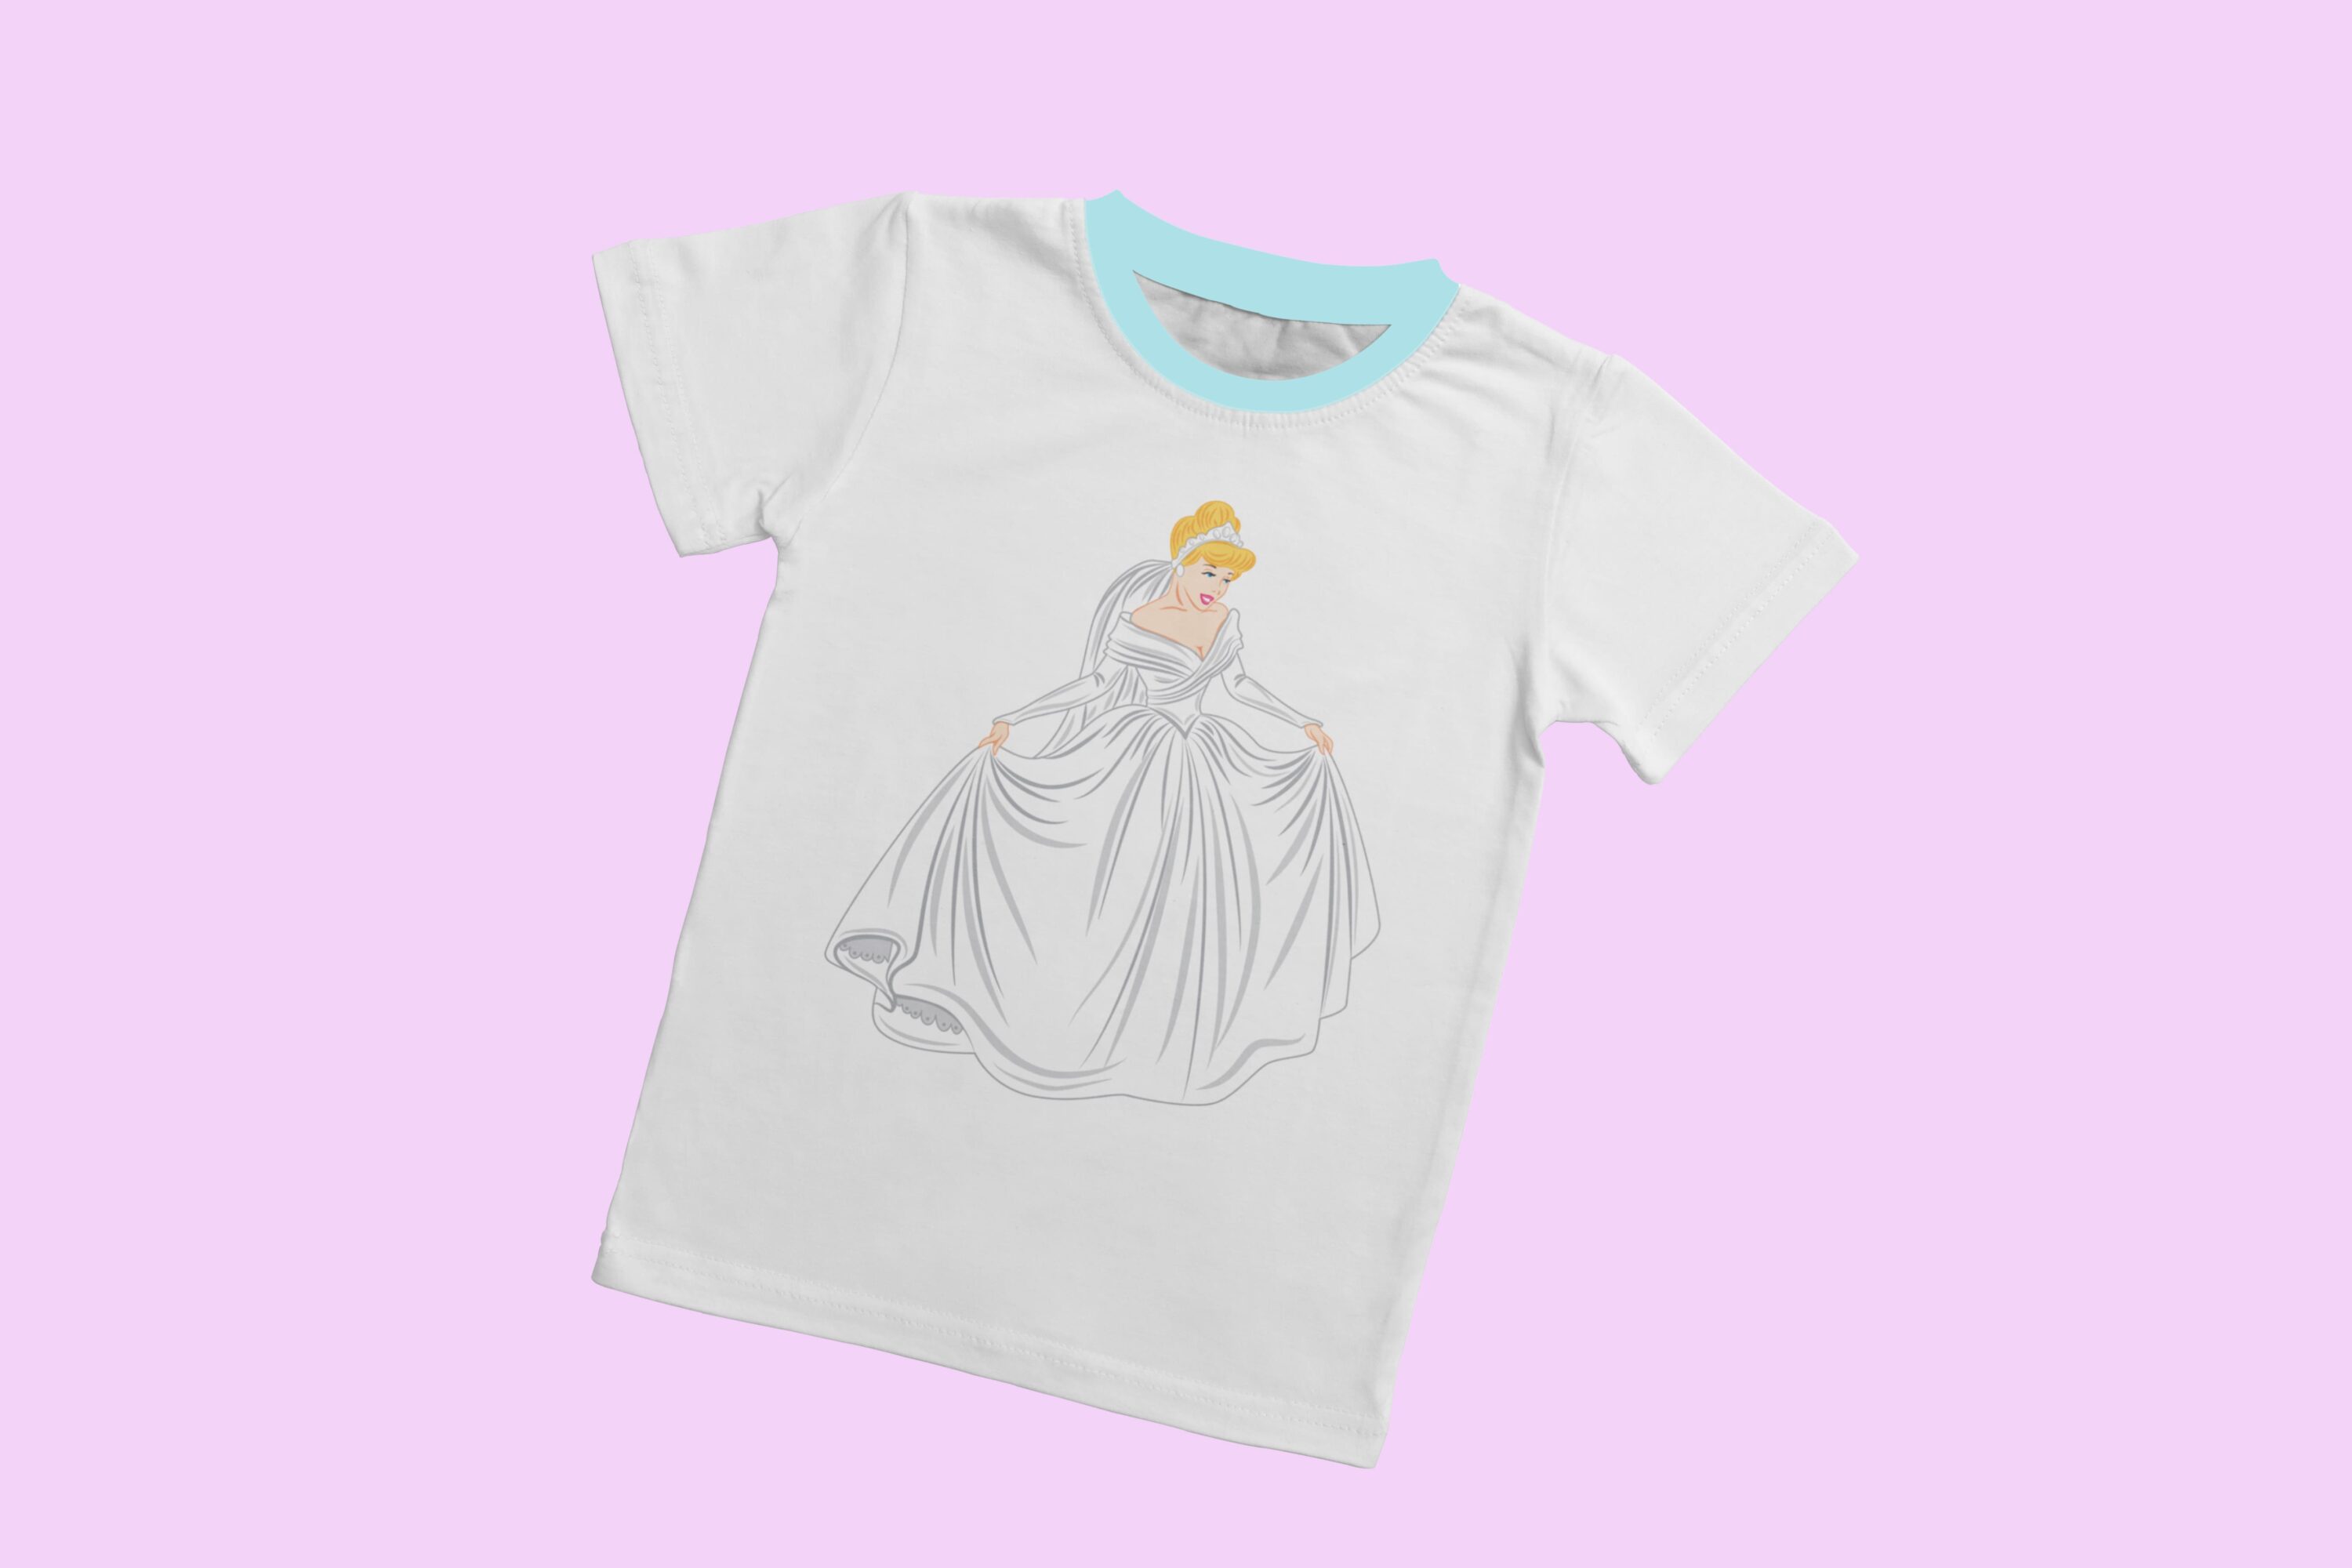 Image of a white t-shirt with wonderful Cinderella print.